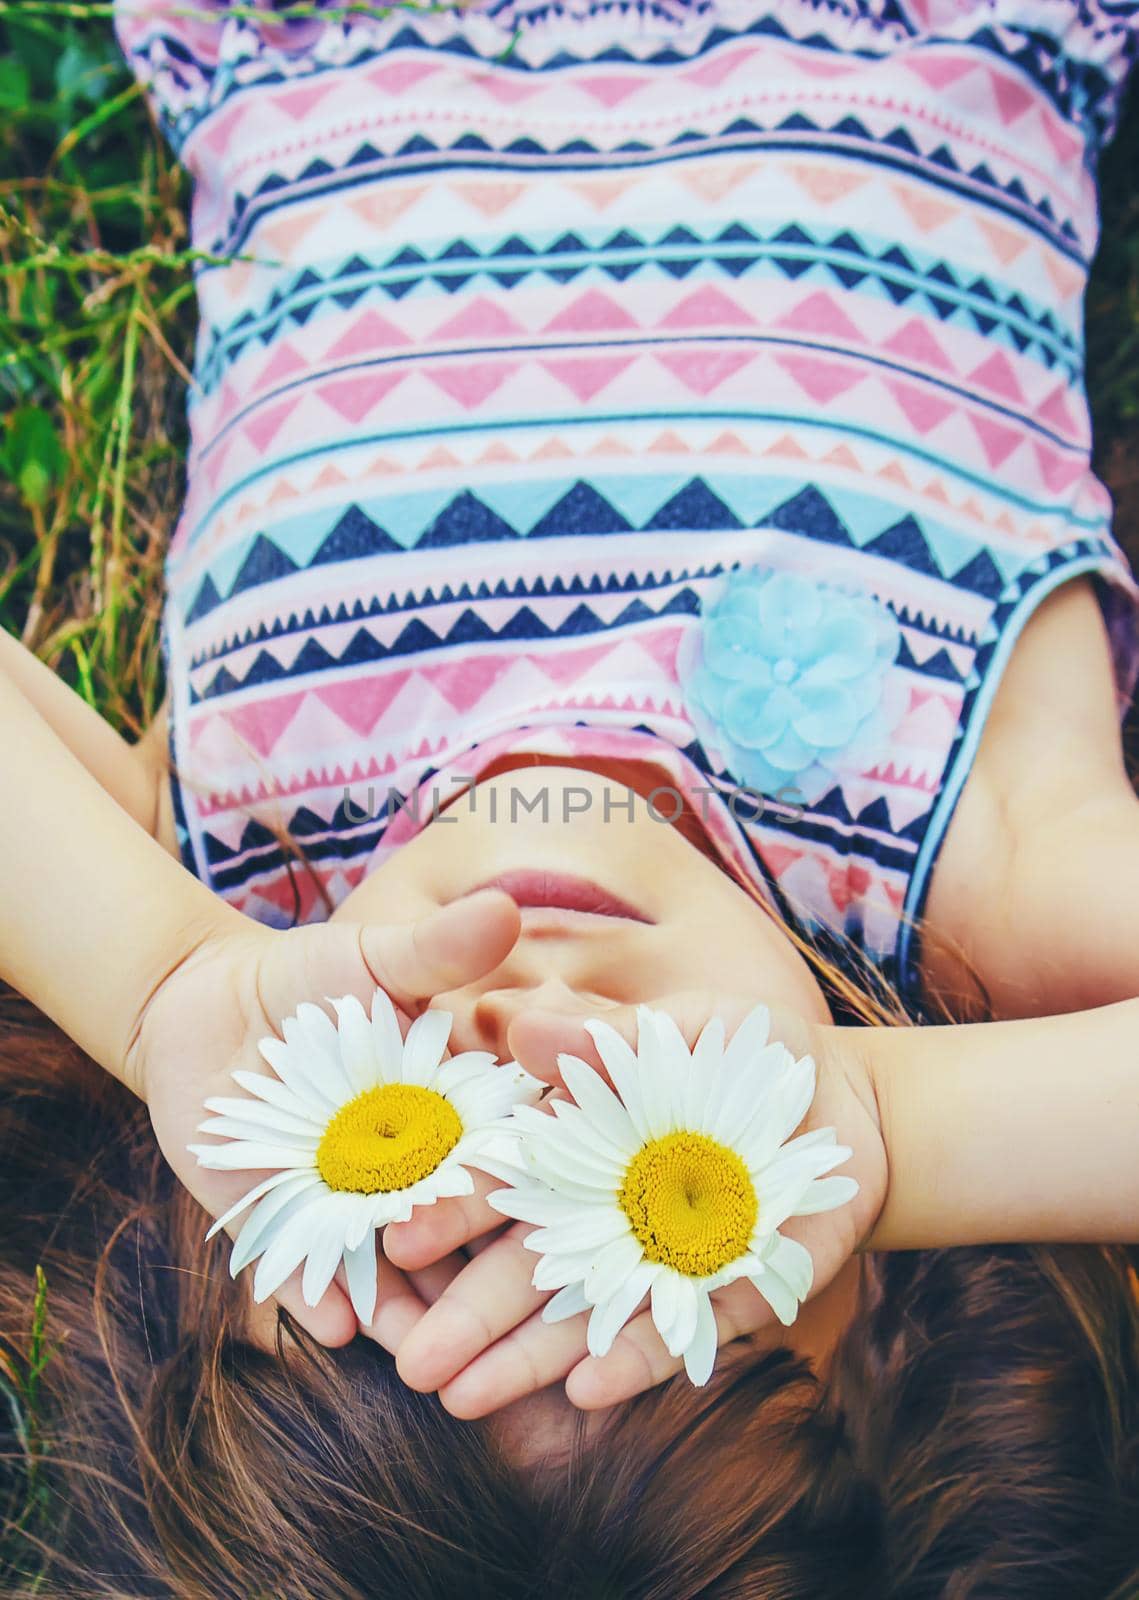 Girl with chamomile. Selective focus. nature flowers. Child.